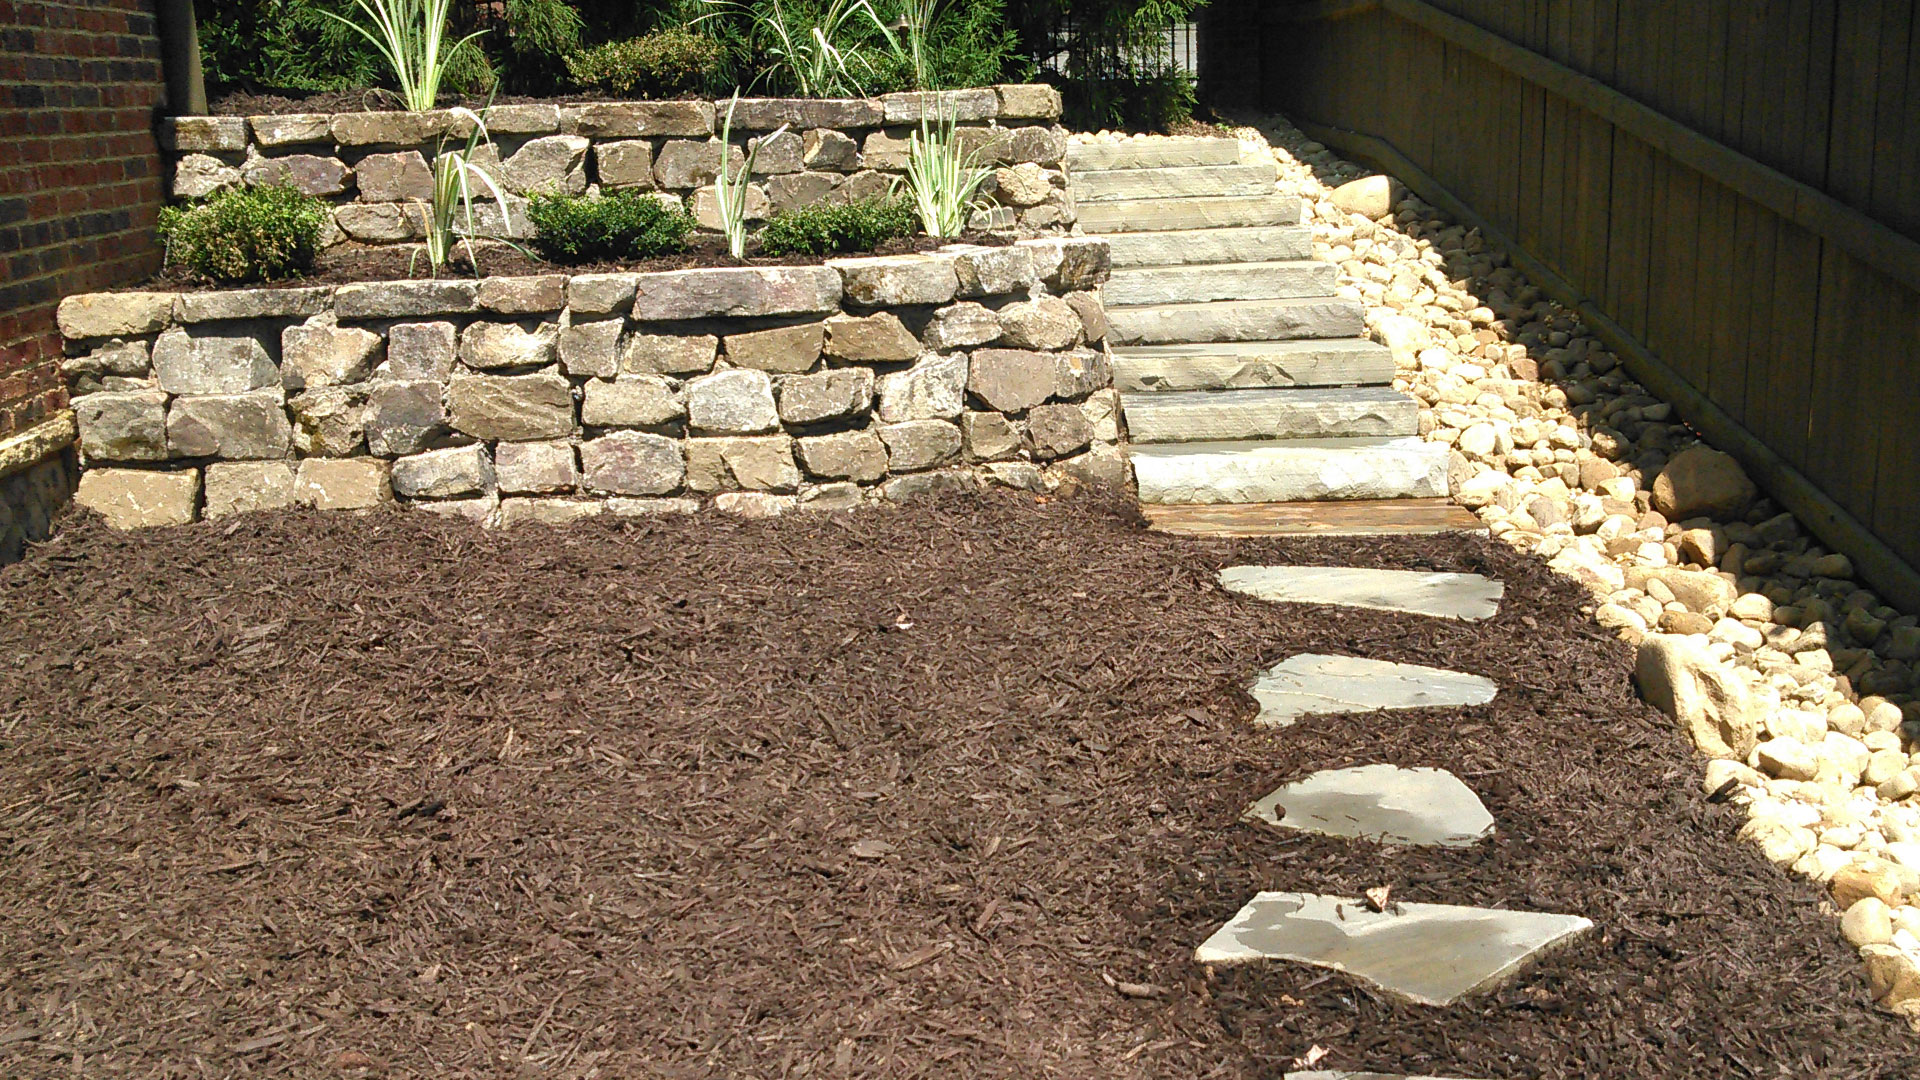 A small rock retaining wall with steps, small plants, and mulch